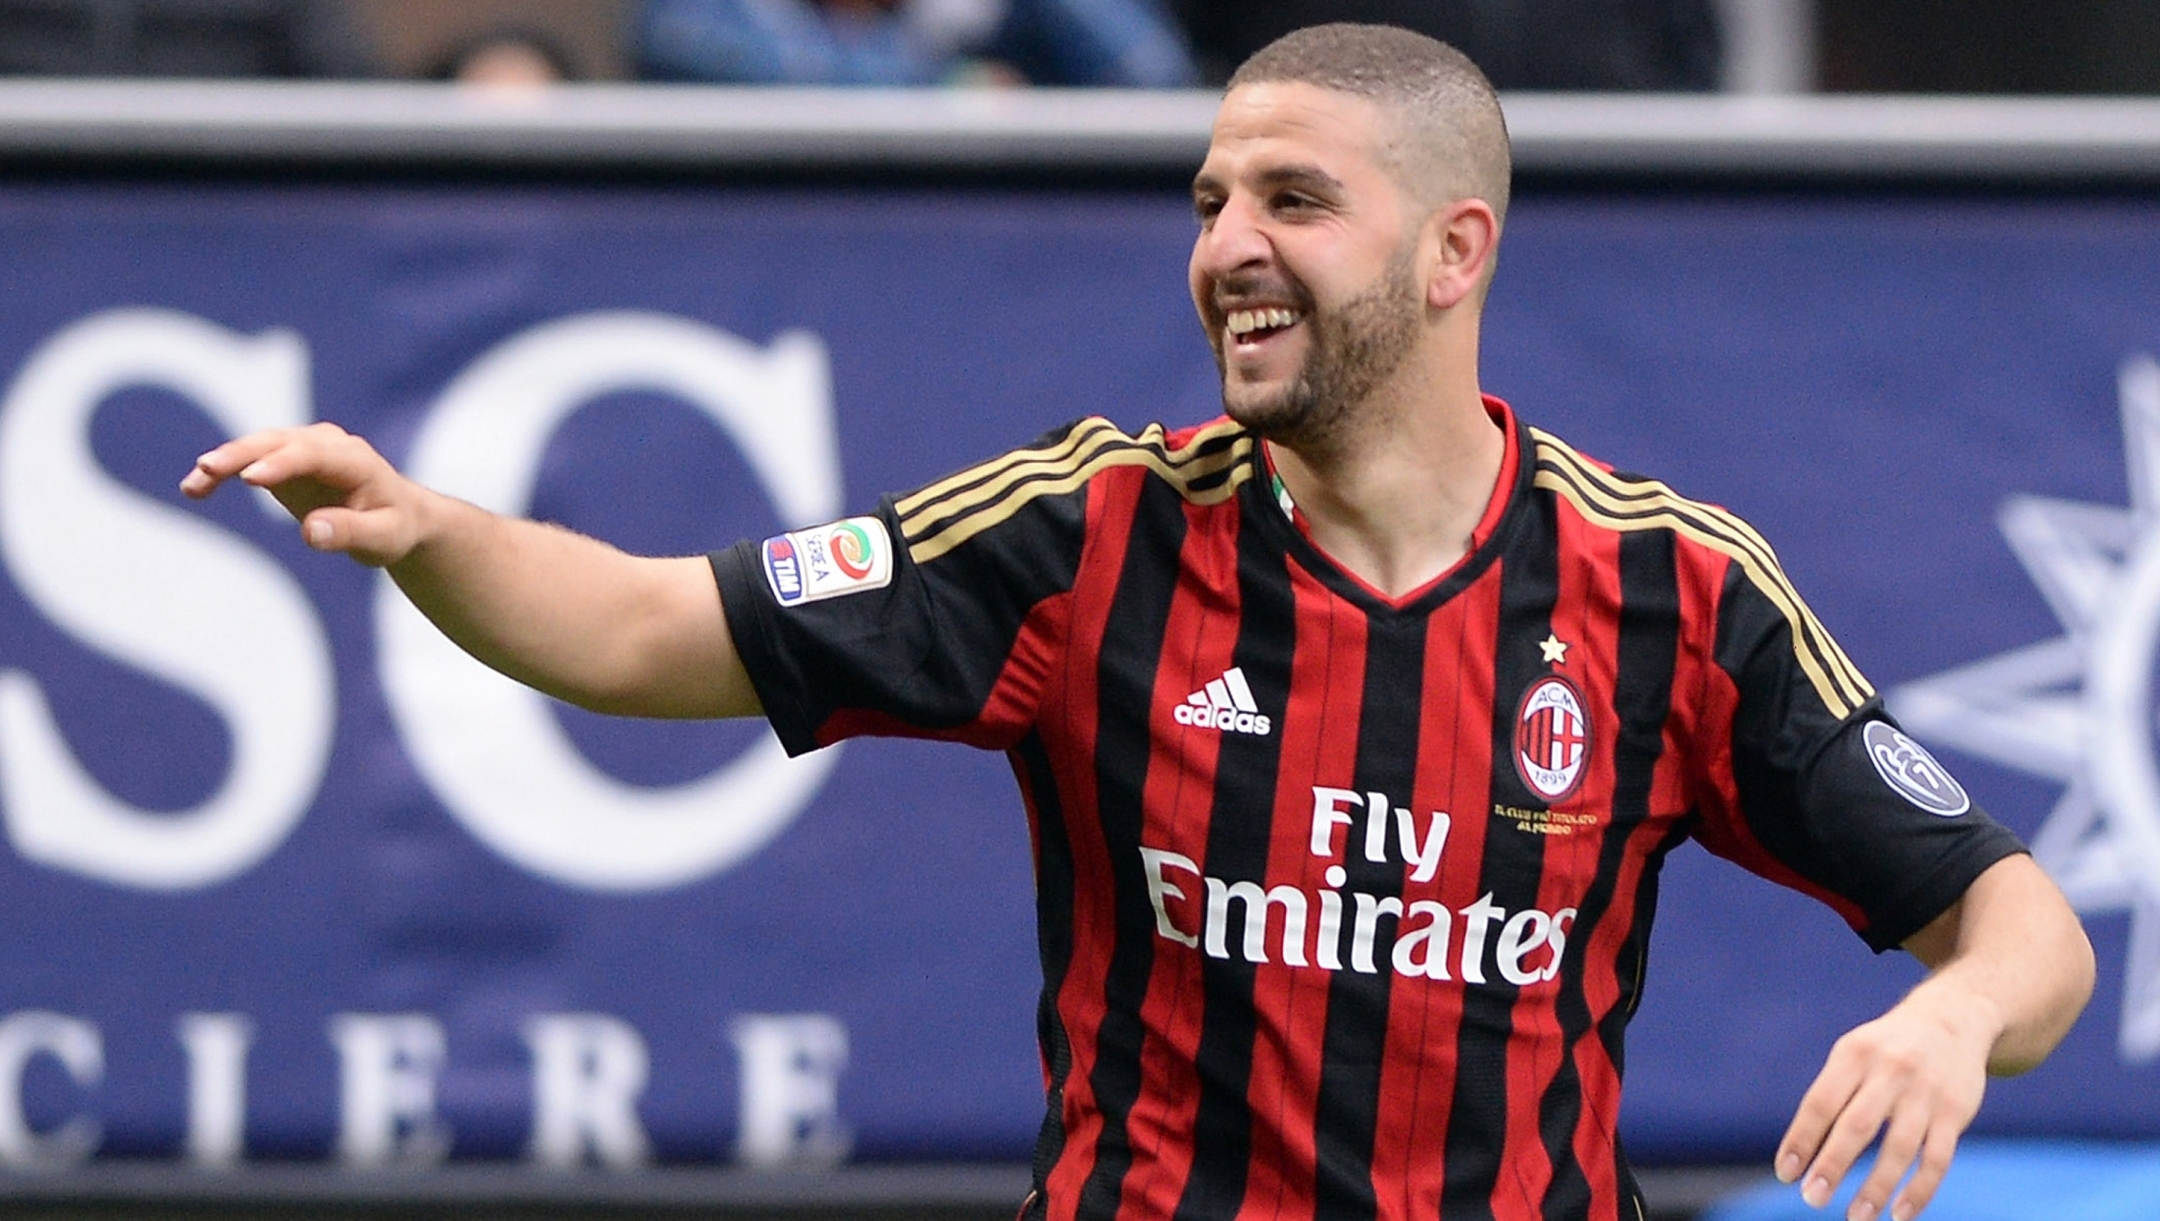 MILAN, ITALY - APRIL 19:  Adel Taarabt of AC Milan (R) celebrates scoring the second goal during the Serie A match between AC Milan and AS Livorno Calcio at San Siro Stadium on April 19, 2014 in Milan, Italy.  (Photo by Claudio Villa/Getty Images)